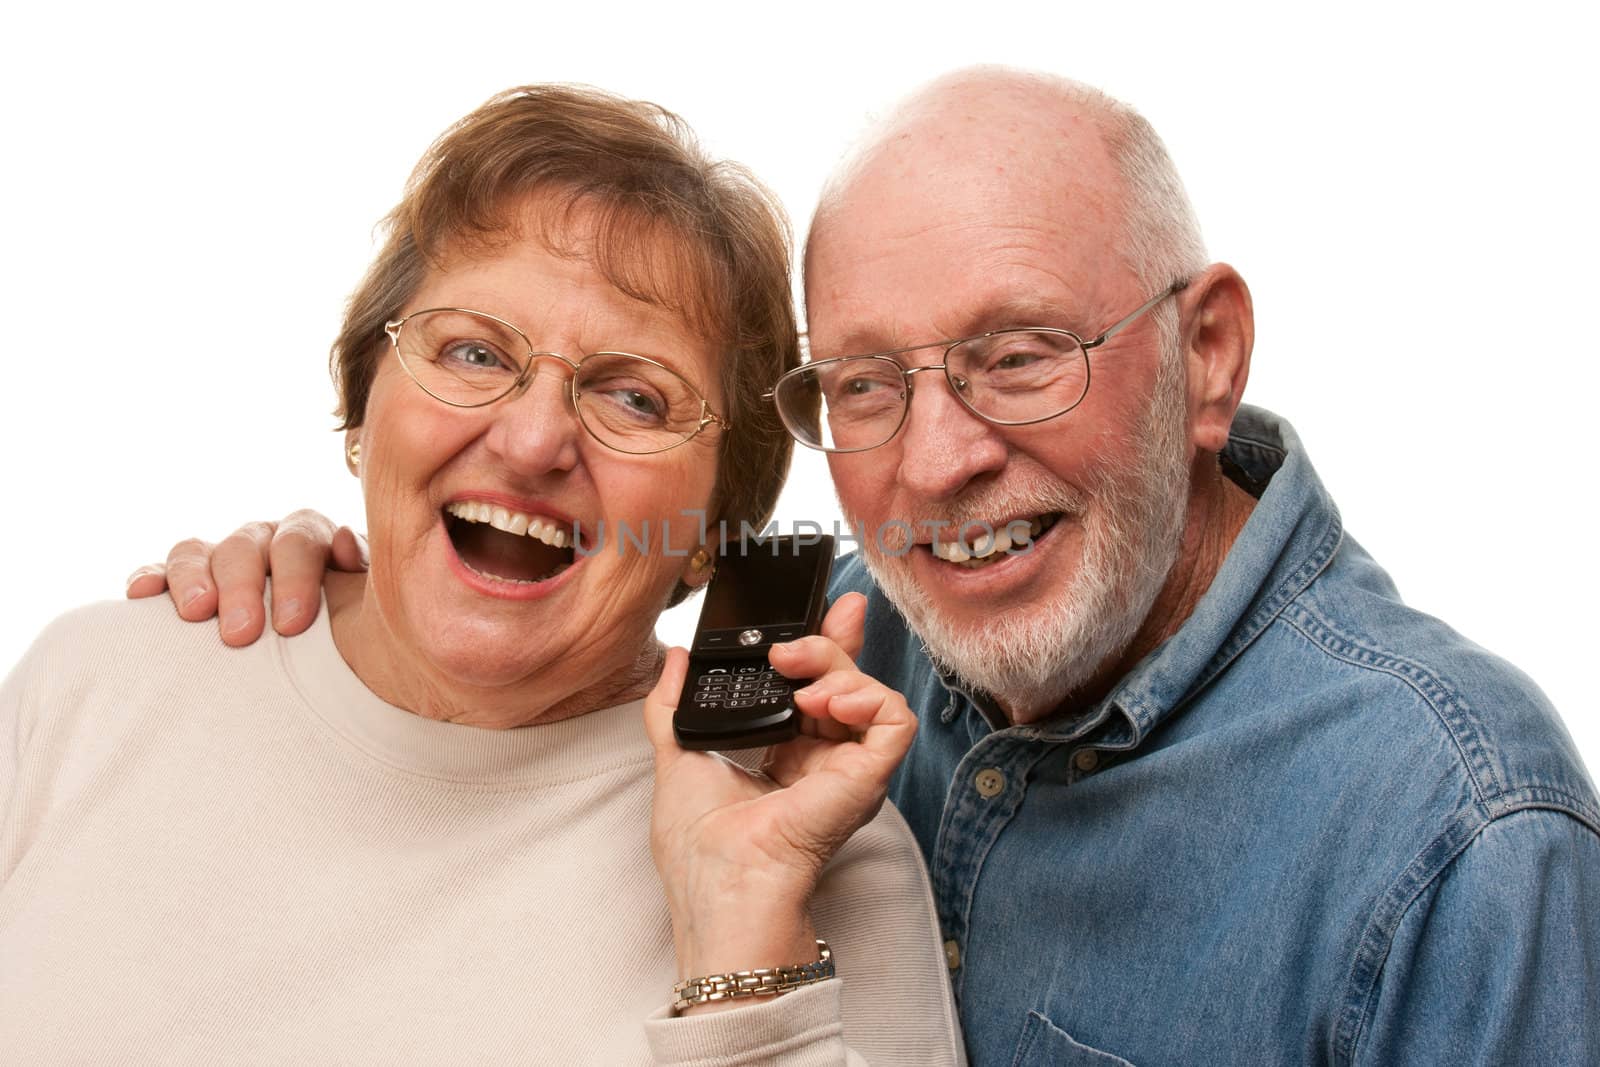 Happy Senior Couple Using Cell Phone Isolated on a White Background.